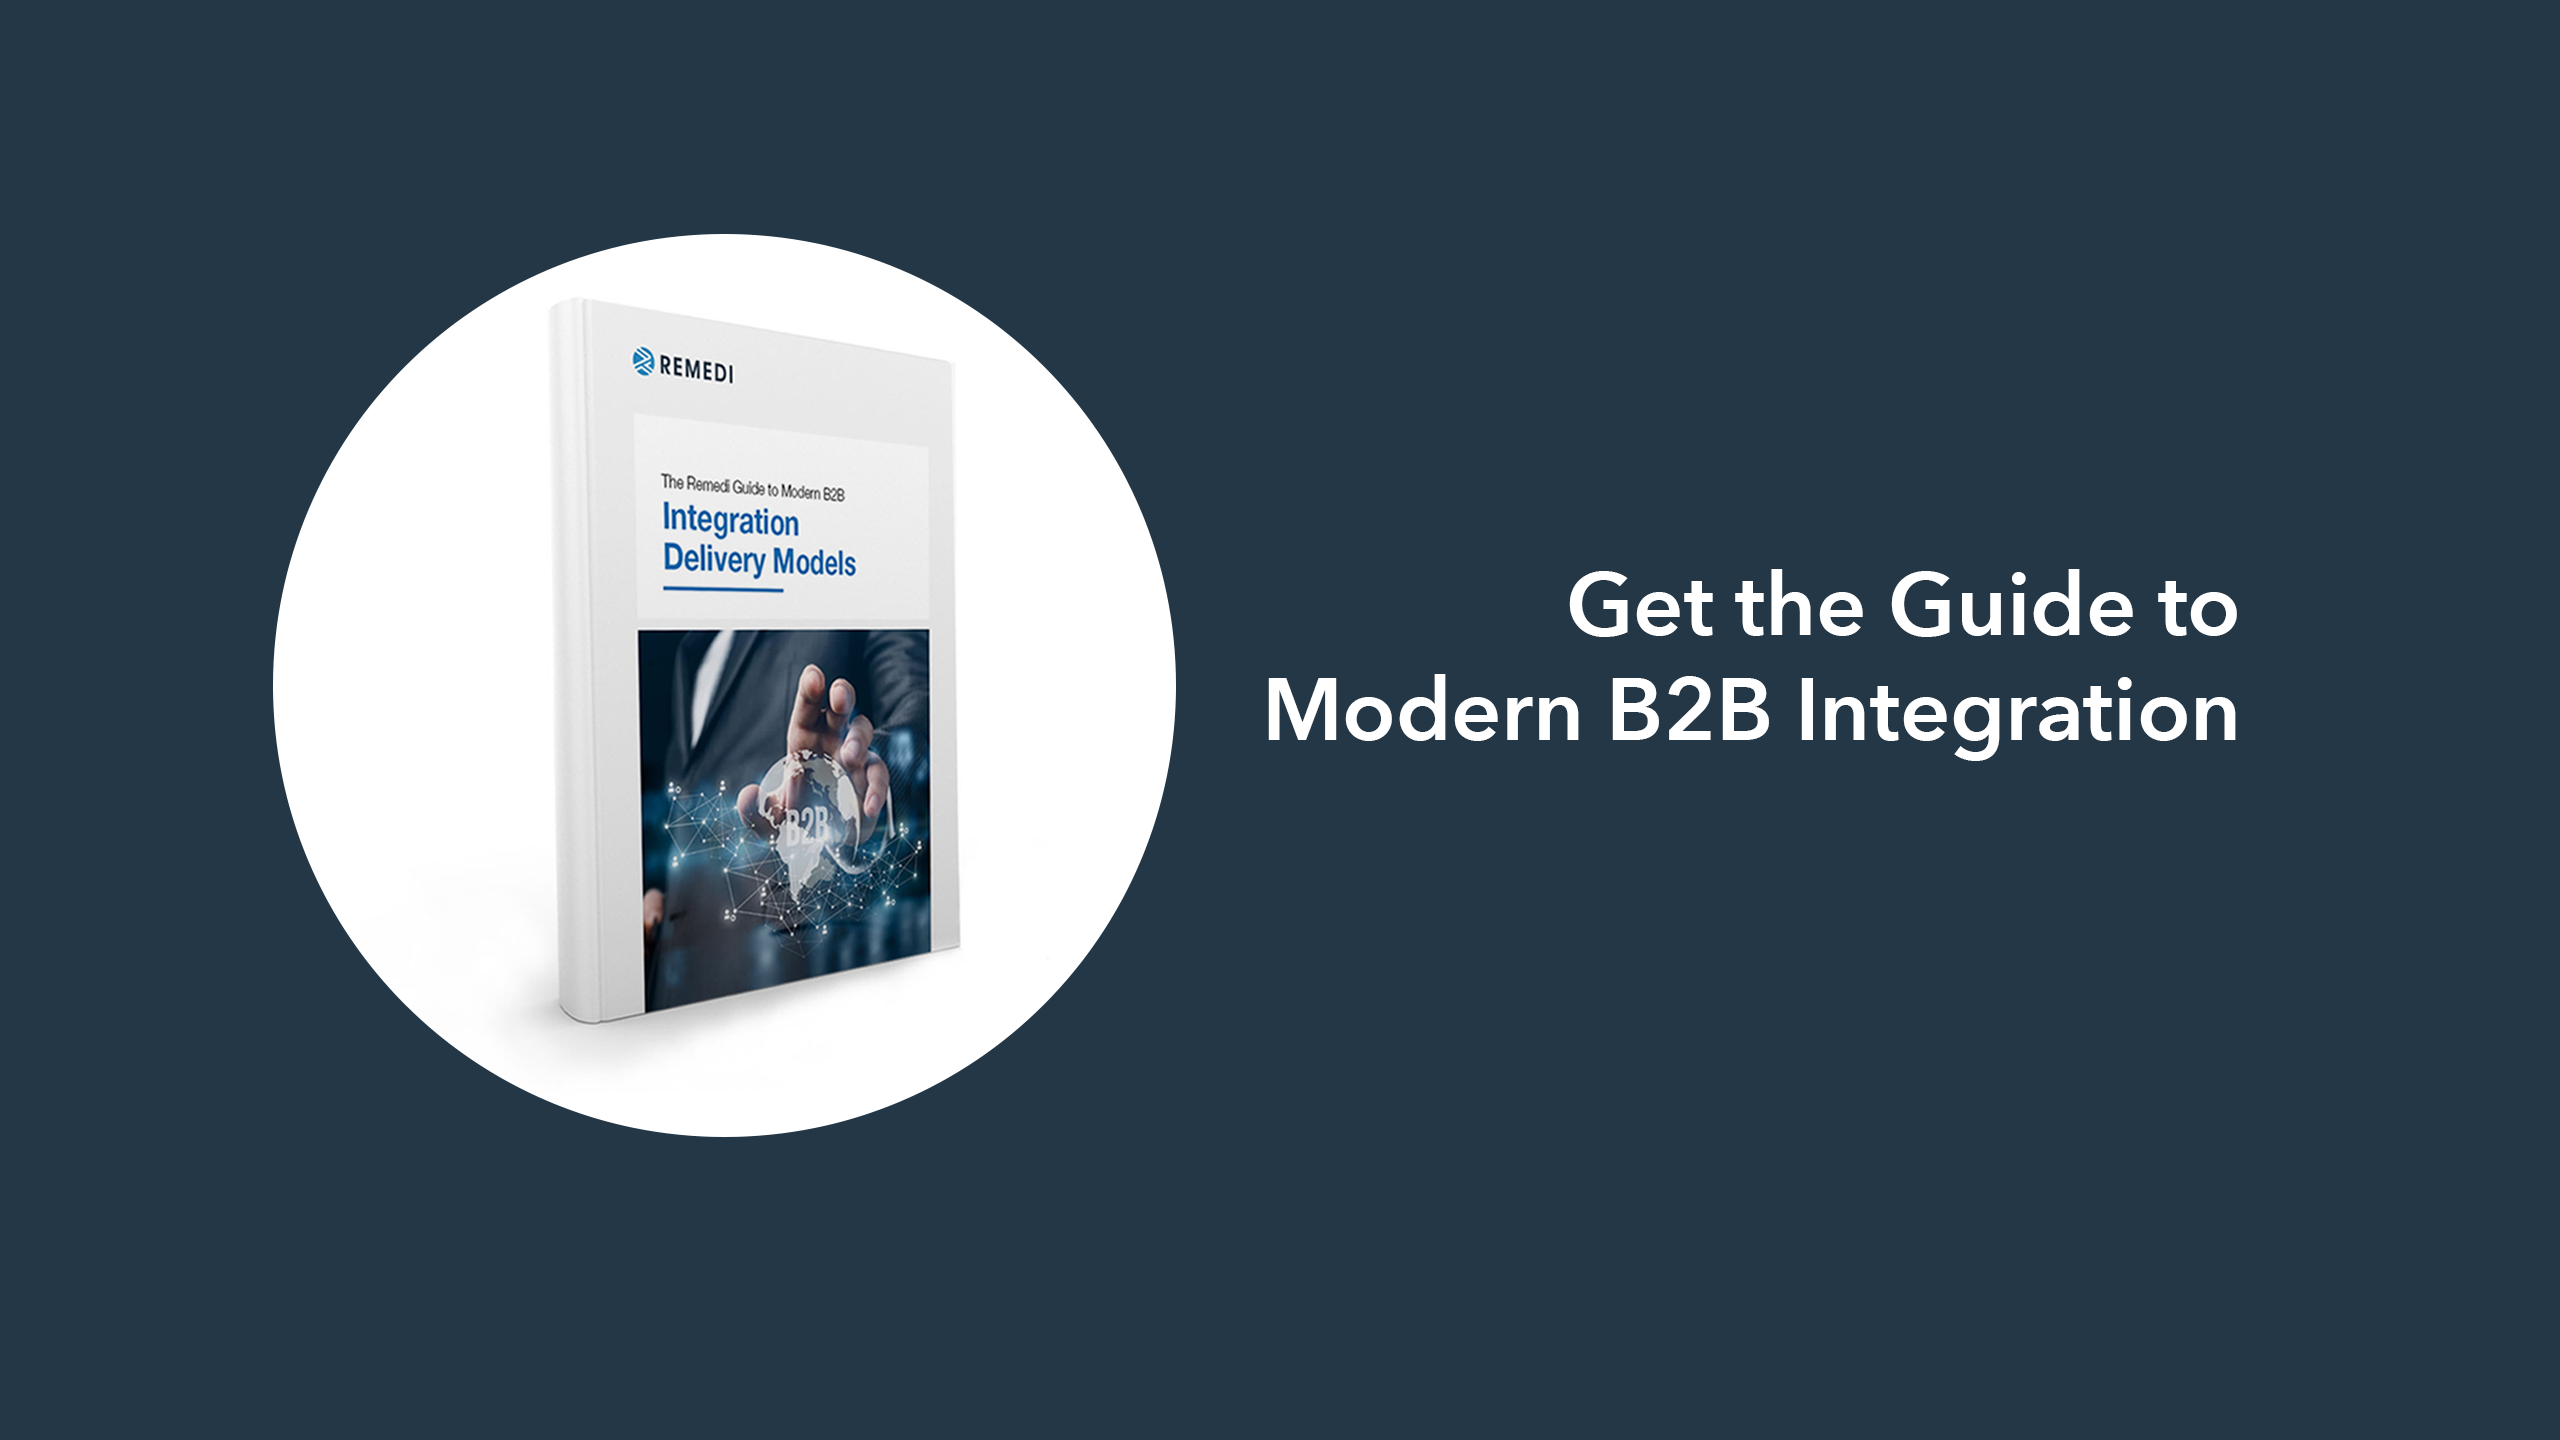 Remedi Guide to Modern B2B Integration Delivery Models